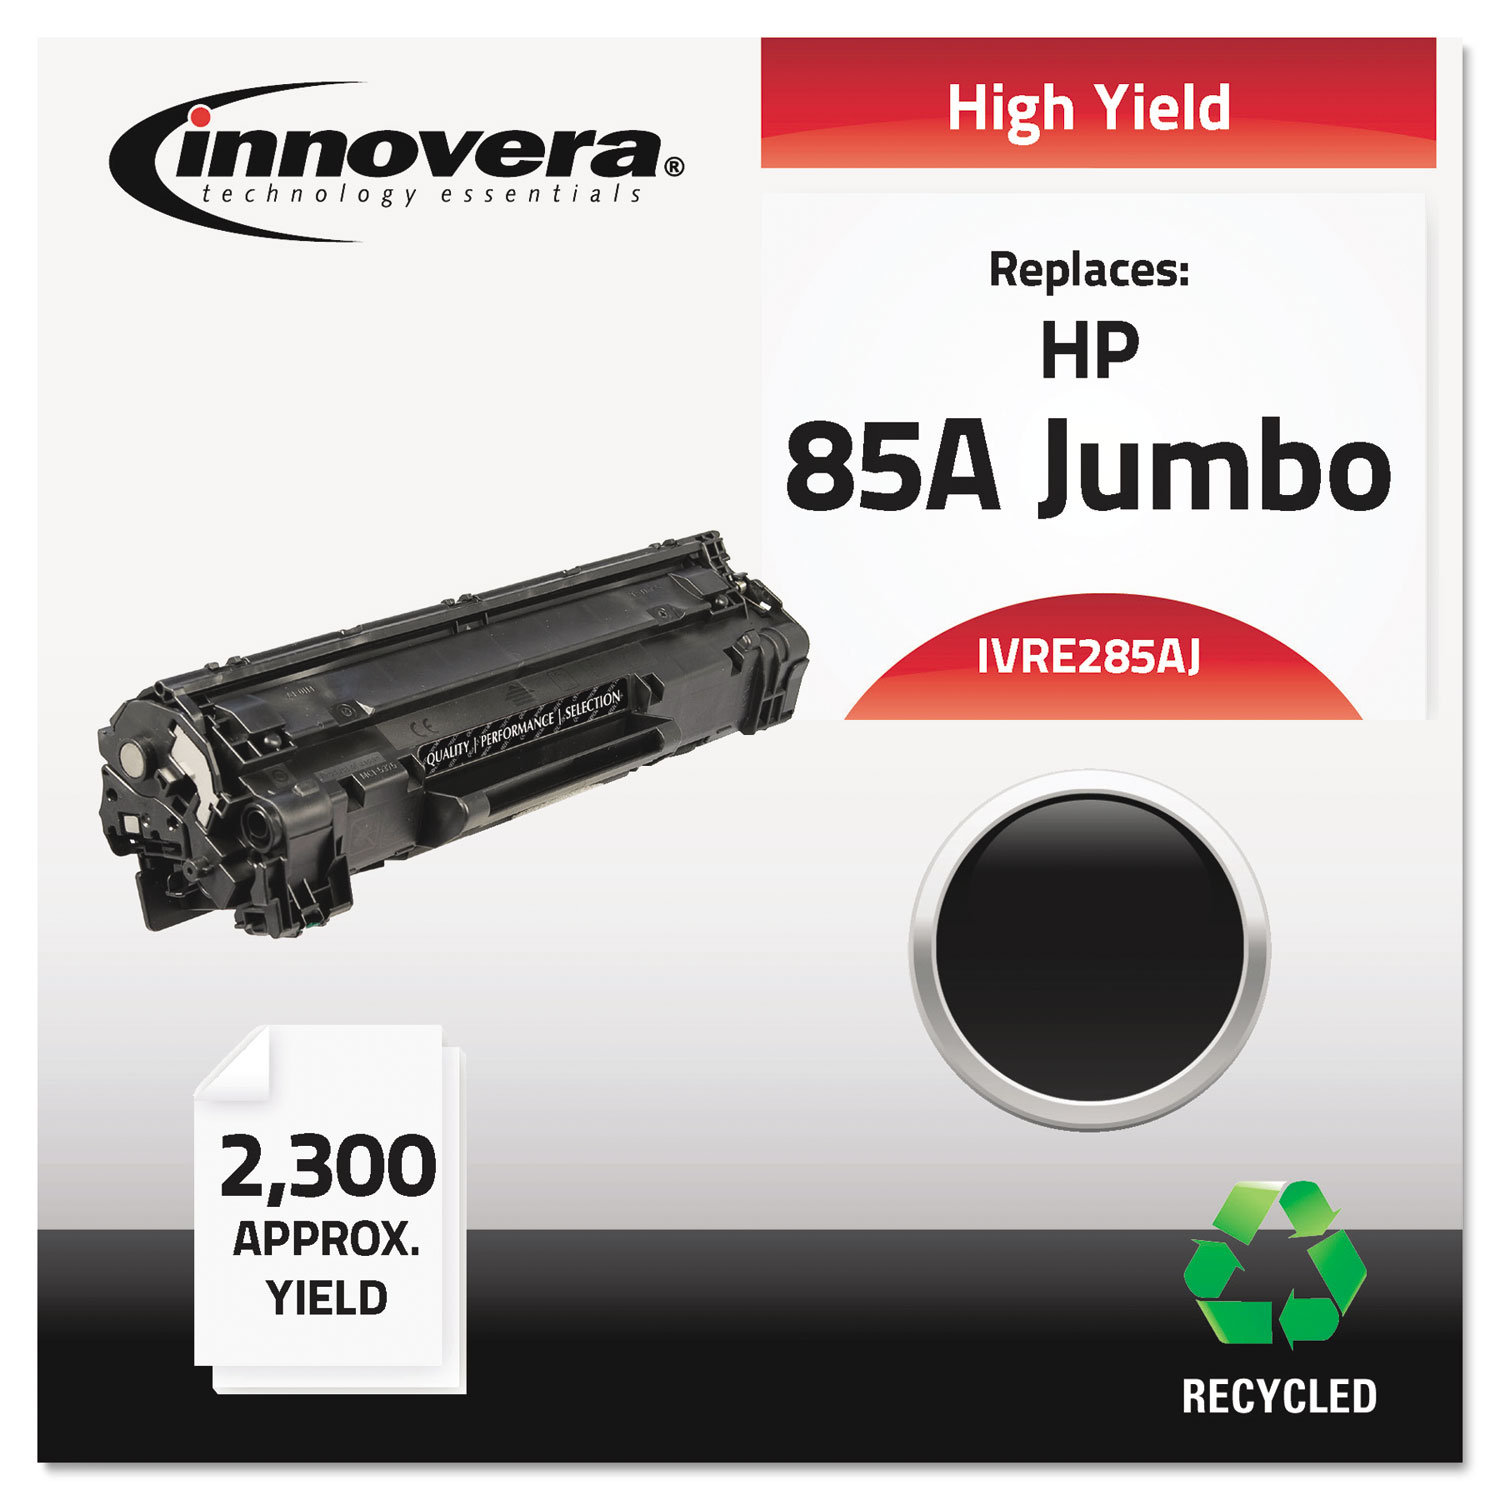 Remanufactured CE285A(J) (85AJ) Extra High-Yield Toner, Black